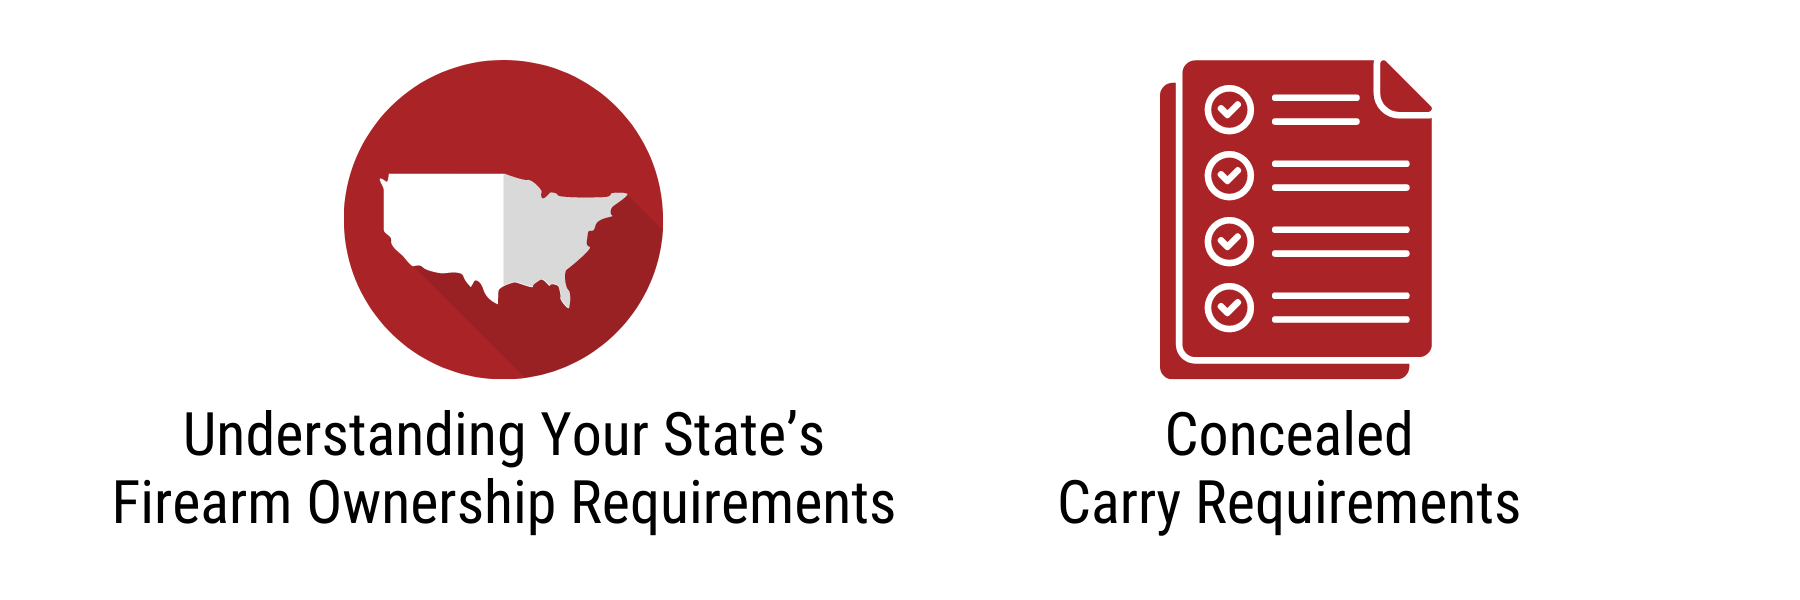 firearm concealed carry requirements